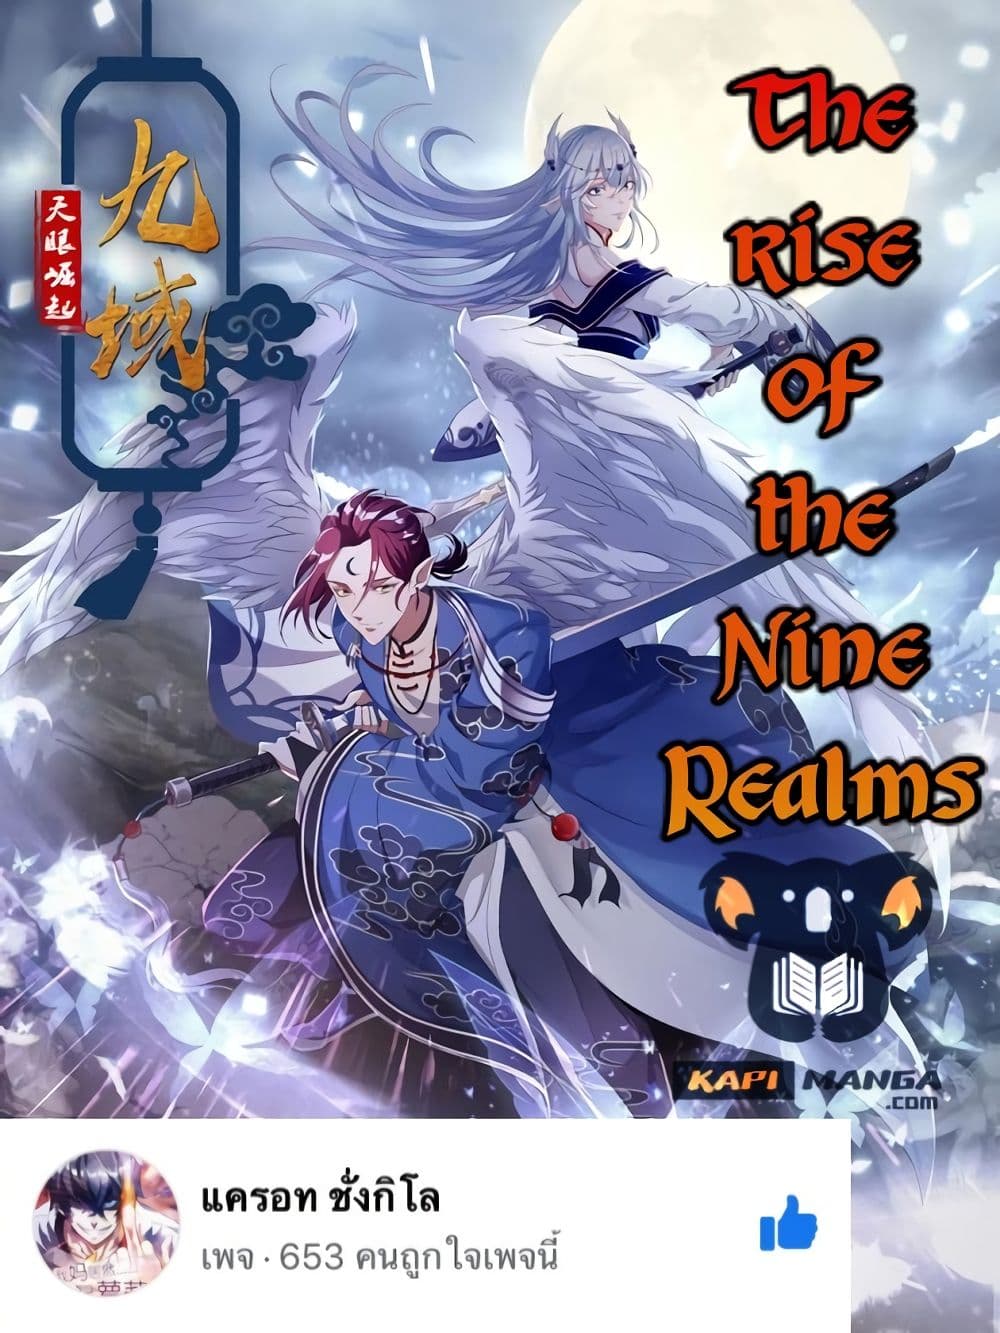 The-Rise-of-The-Nine-Realms--19-1.jpg